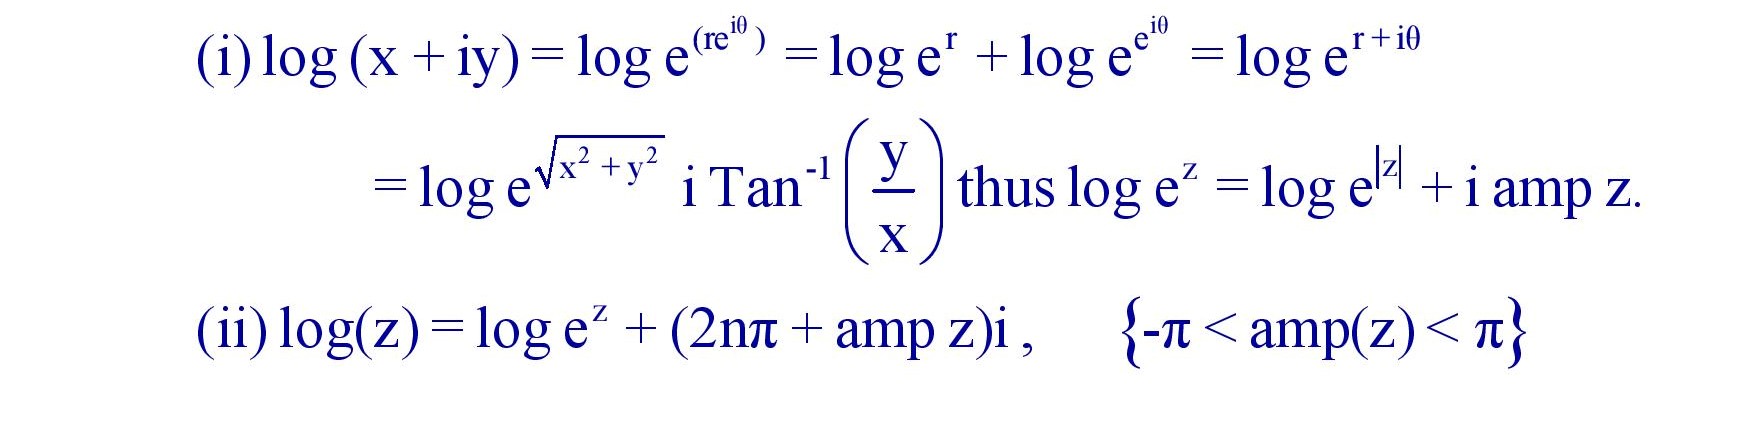 Logarithm of Complex Number